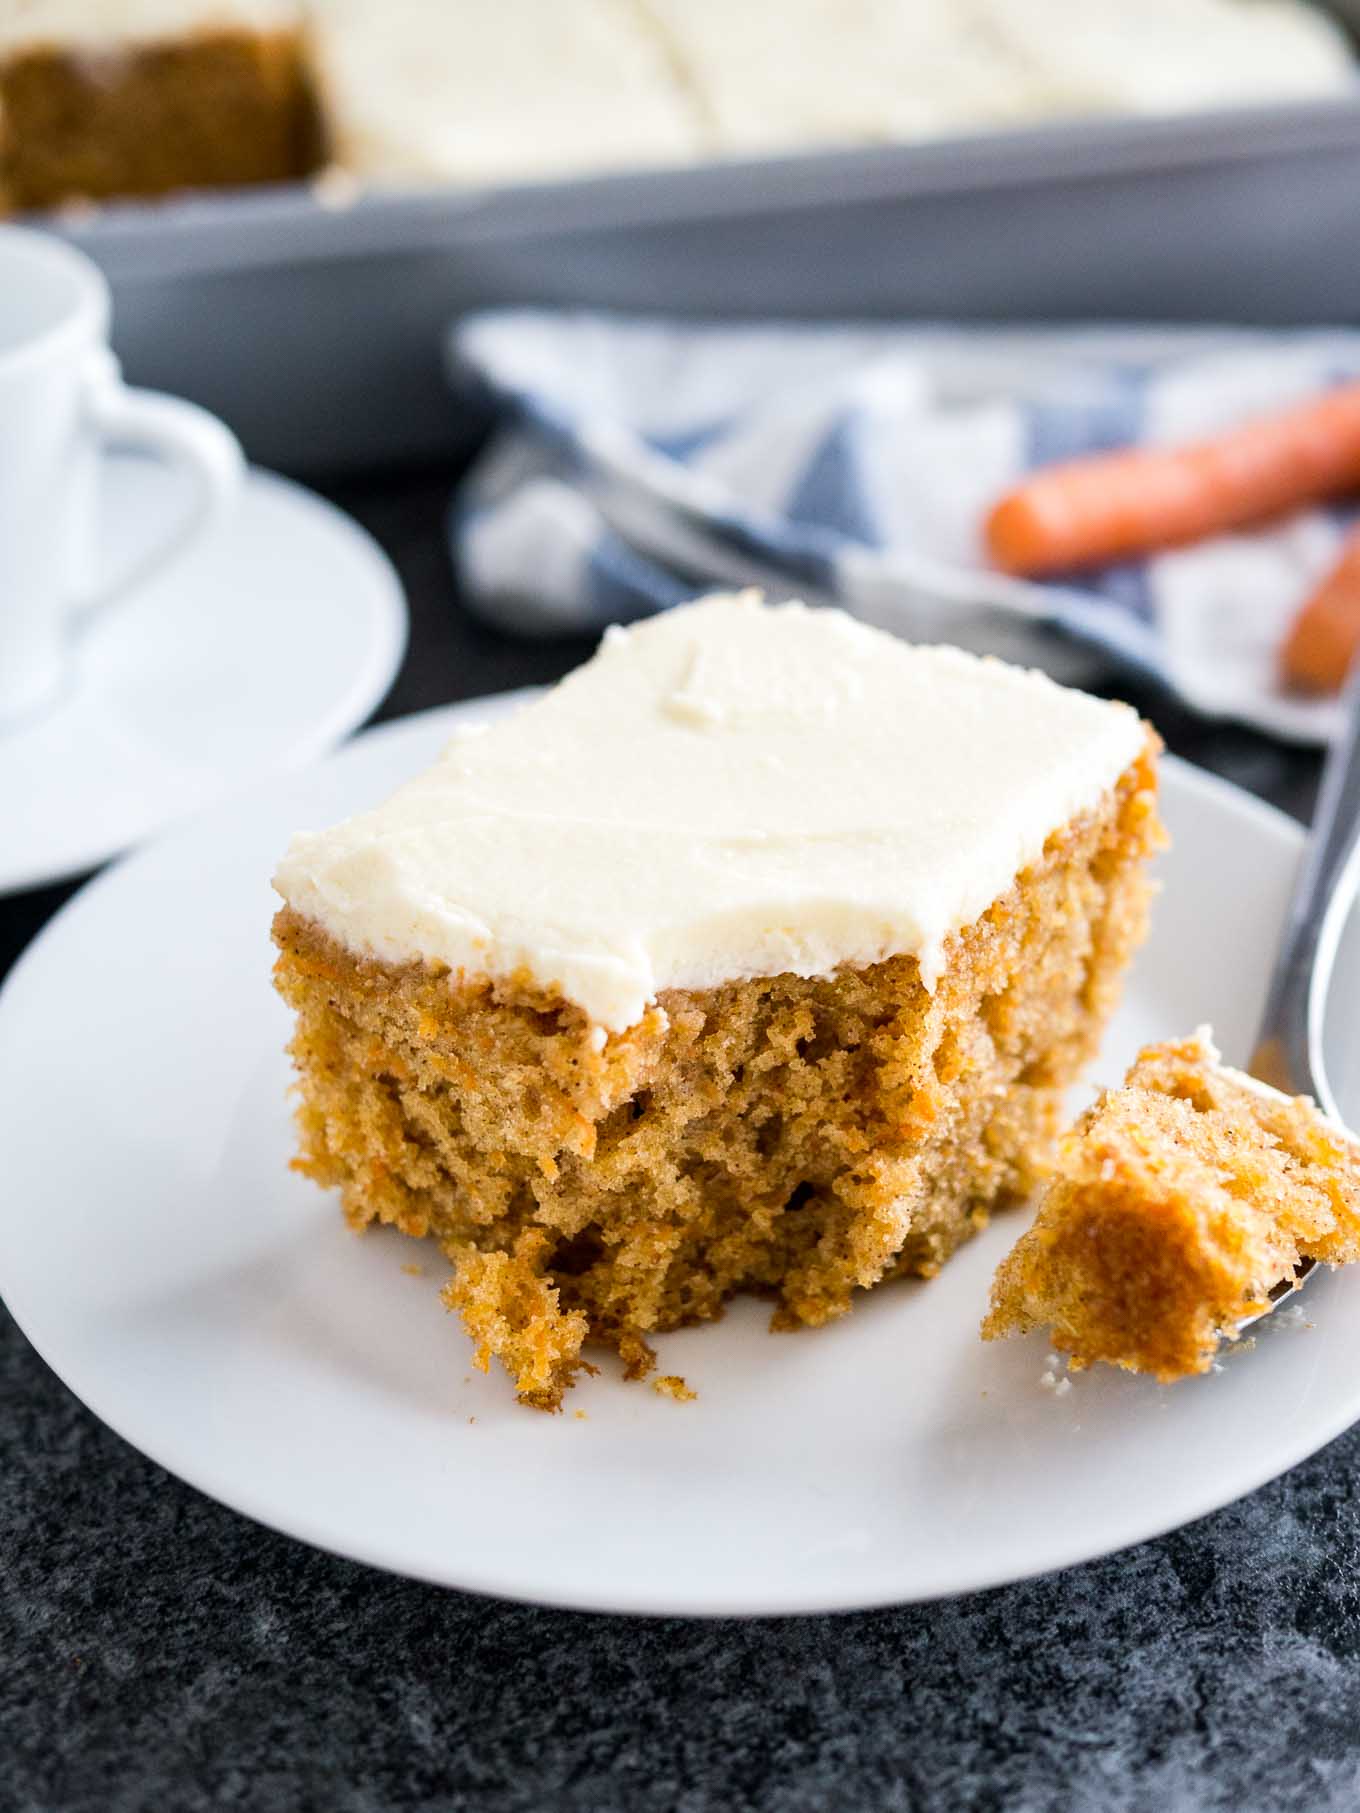 Easy Carrot Cake Recipe with Cream Cheese Frosting (Nut-free)